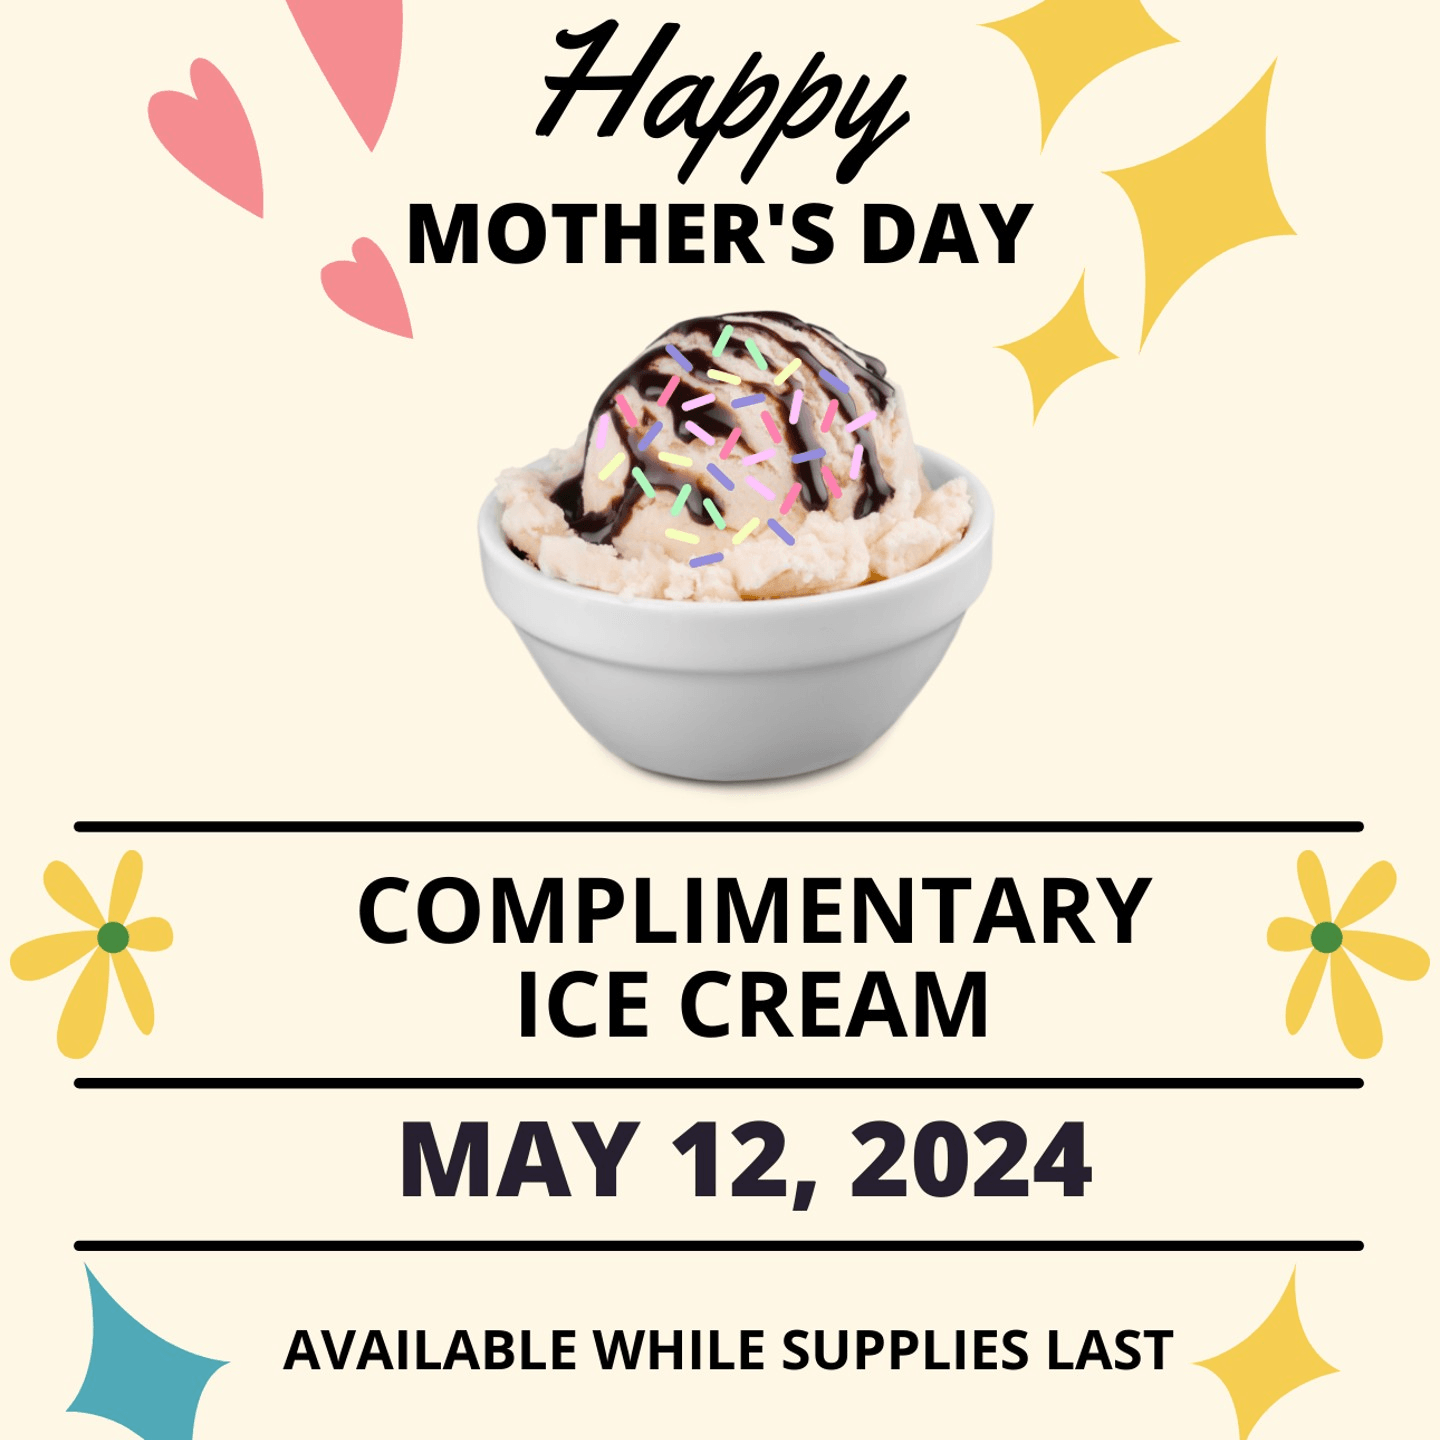 Complimentary Ice Cream on Mother's Day!